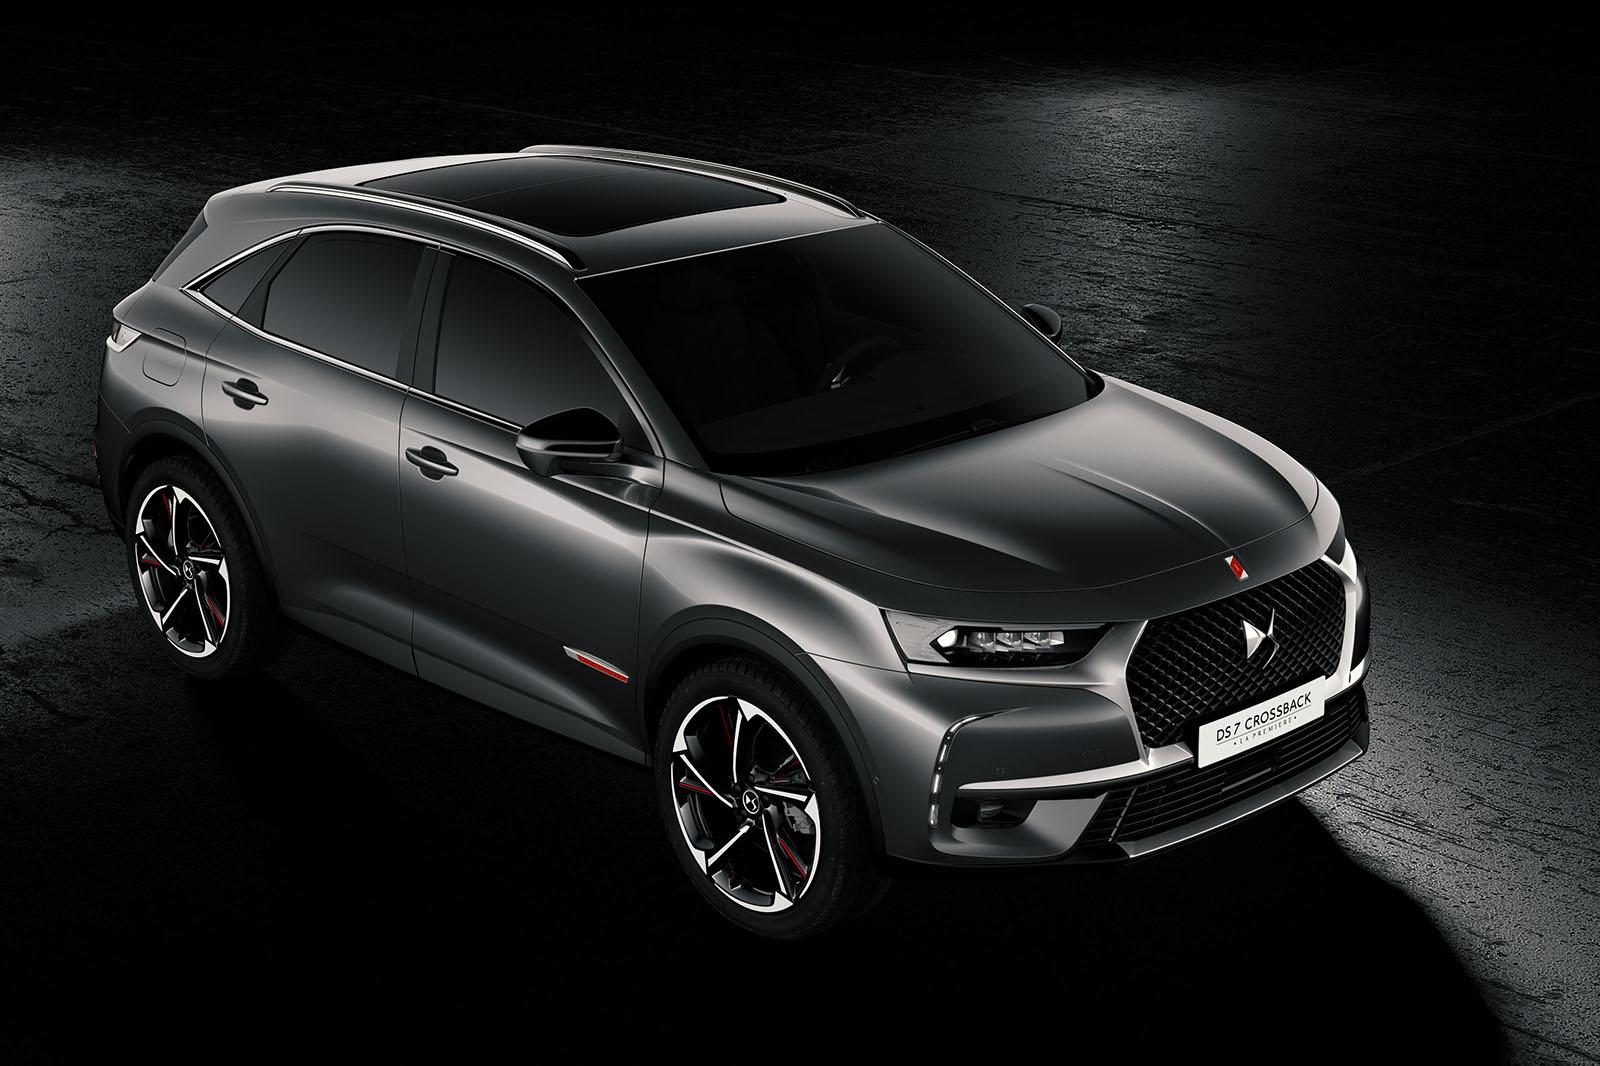 DS 7 Crossback priced from £050